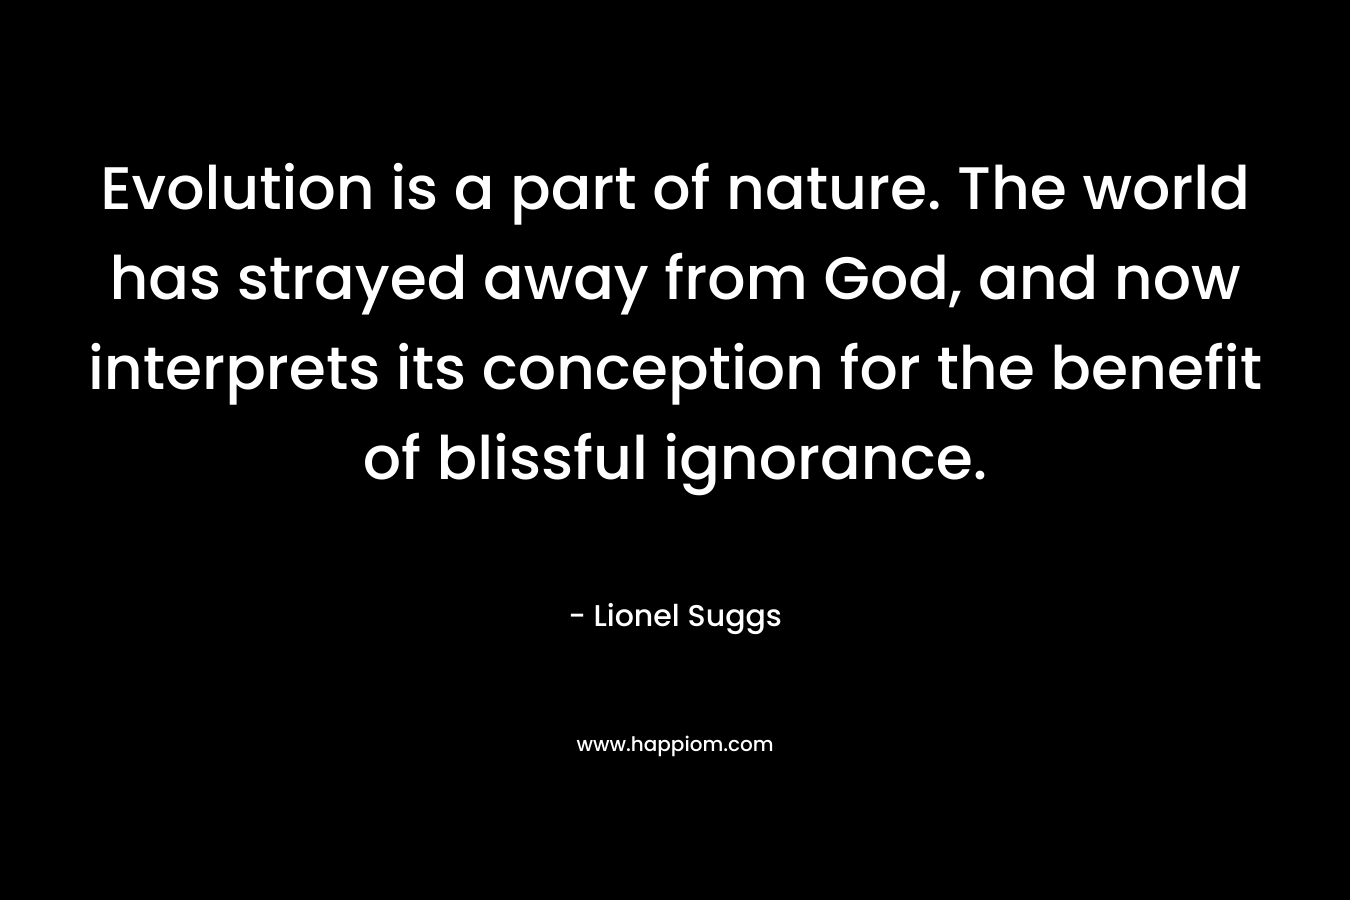 Evolution is a part of nature. The world has strayed away from God, and now interprets its conception for the benefit of blissful ignorance.